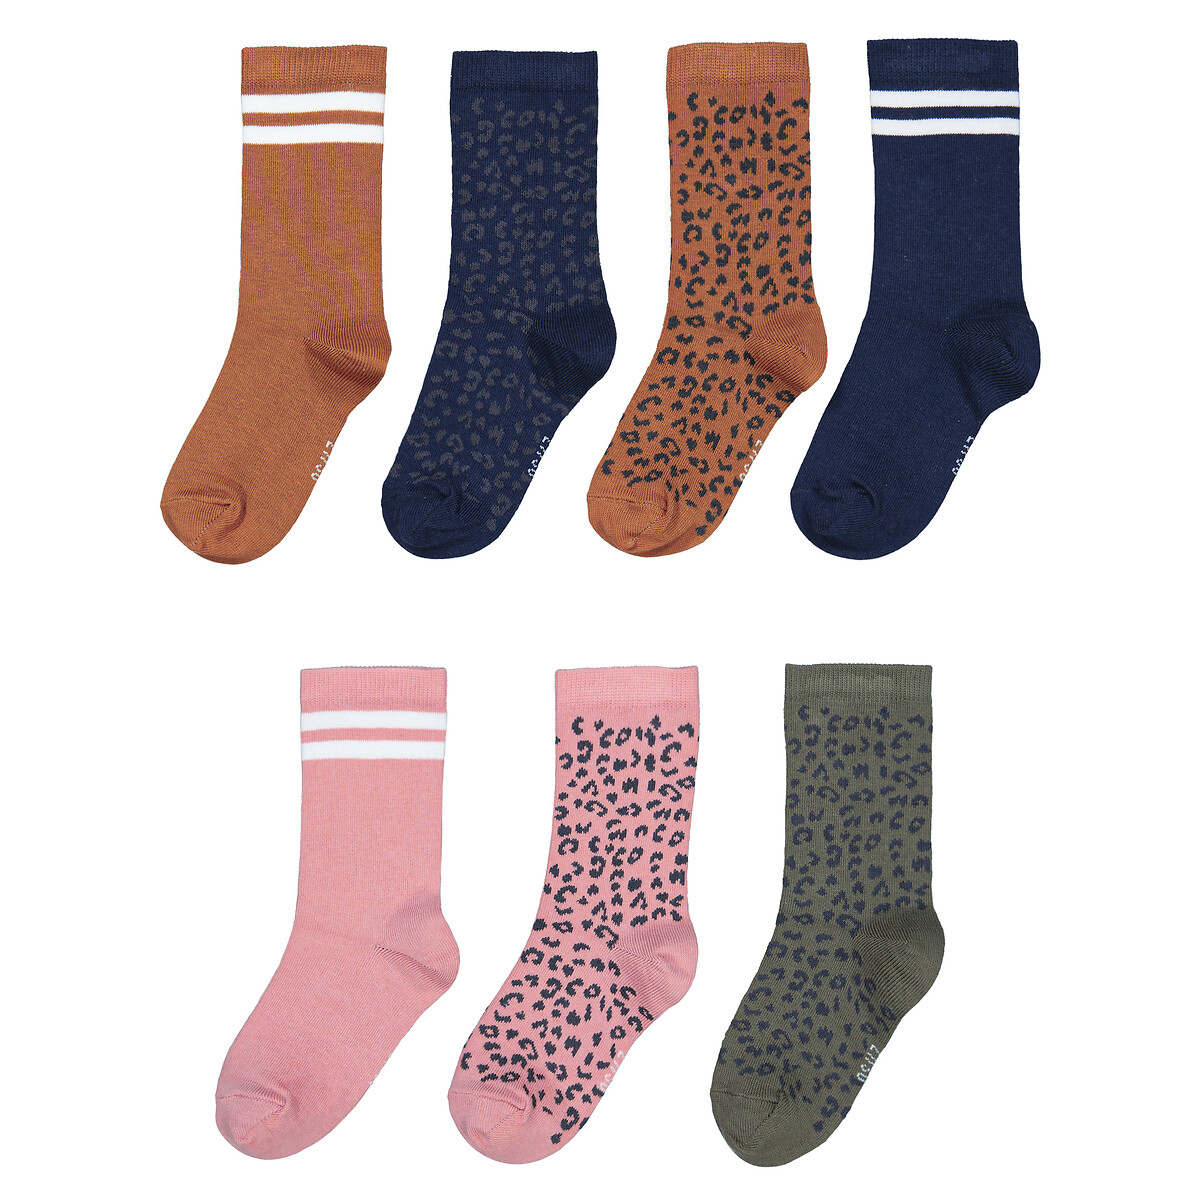 Pack of 7 Pairs of Socks in Cotton Mix, Leopard/Striped Print